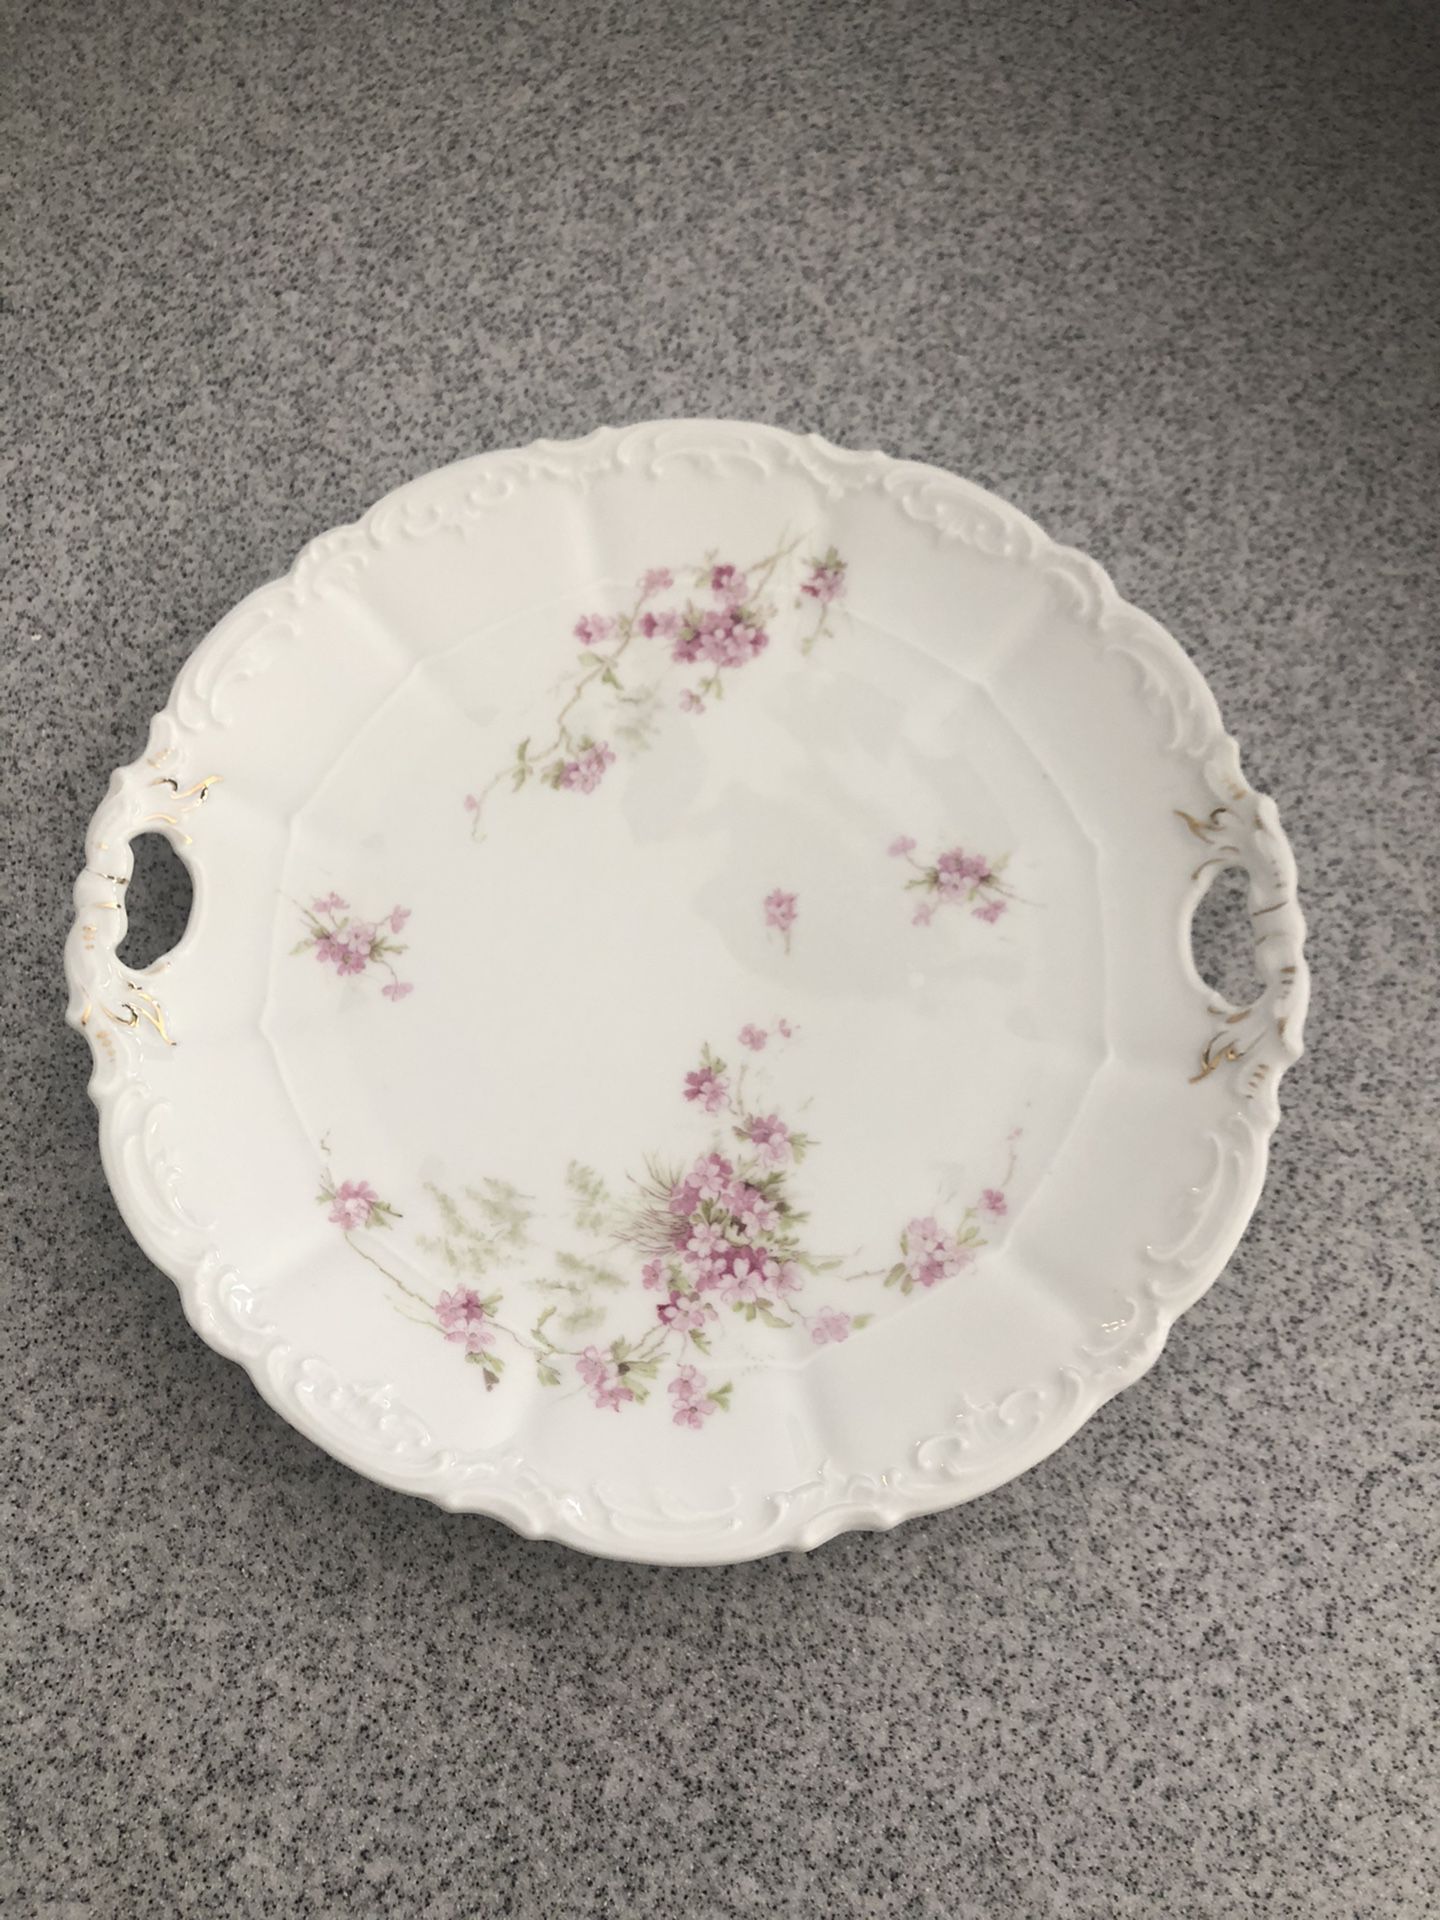 Welmar antique floral China plate with handles